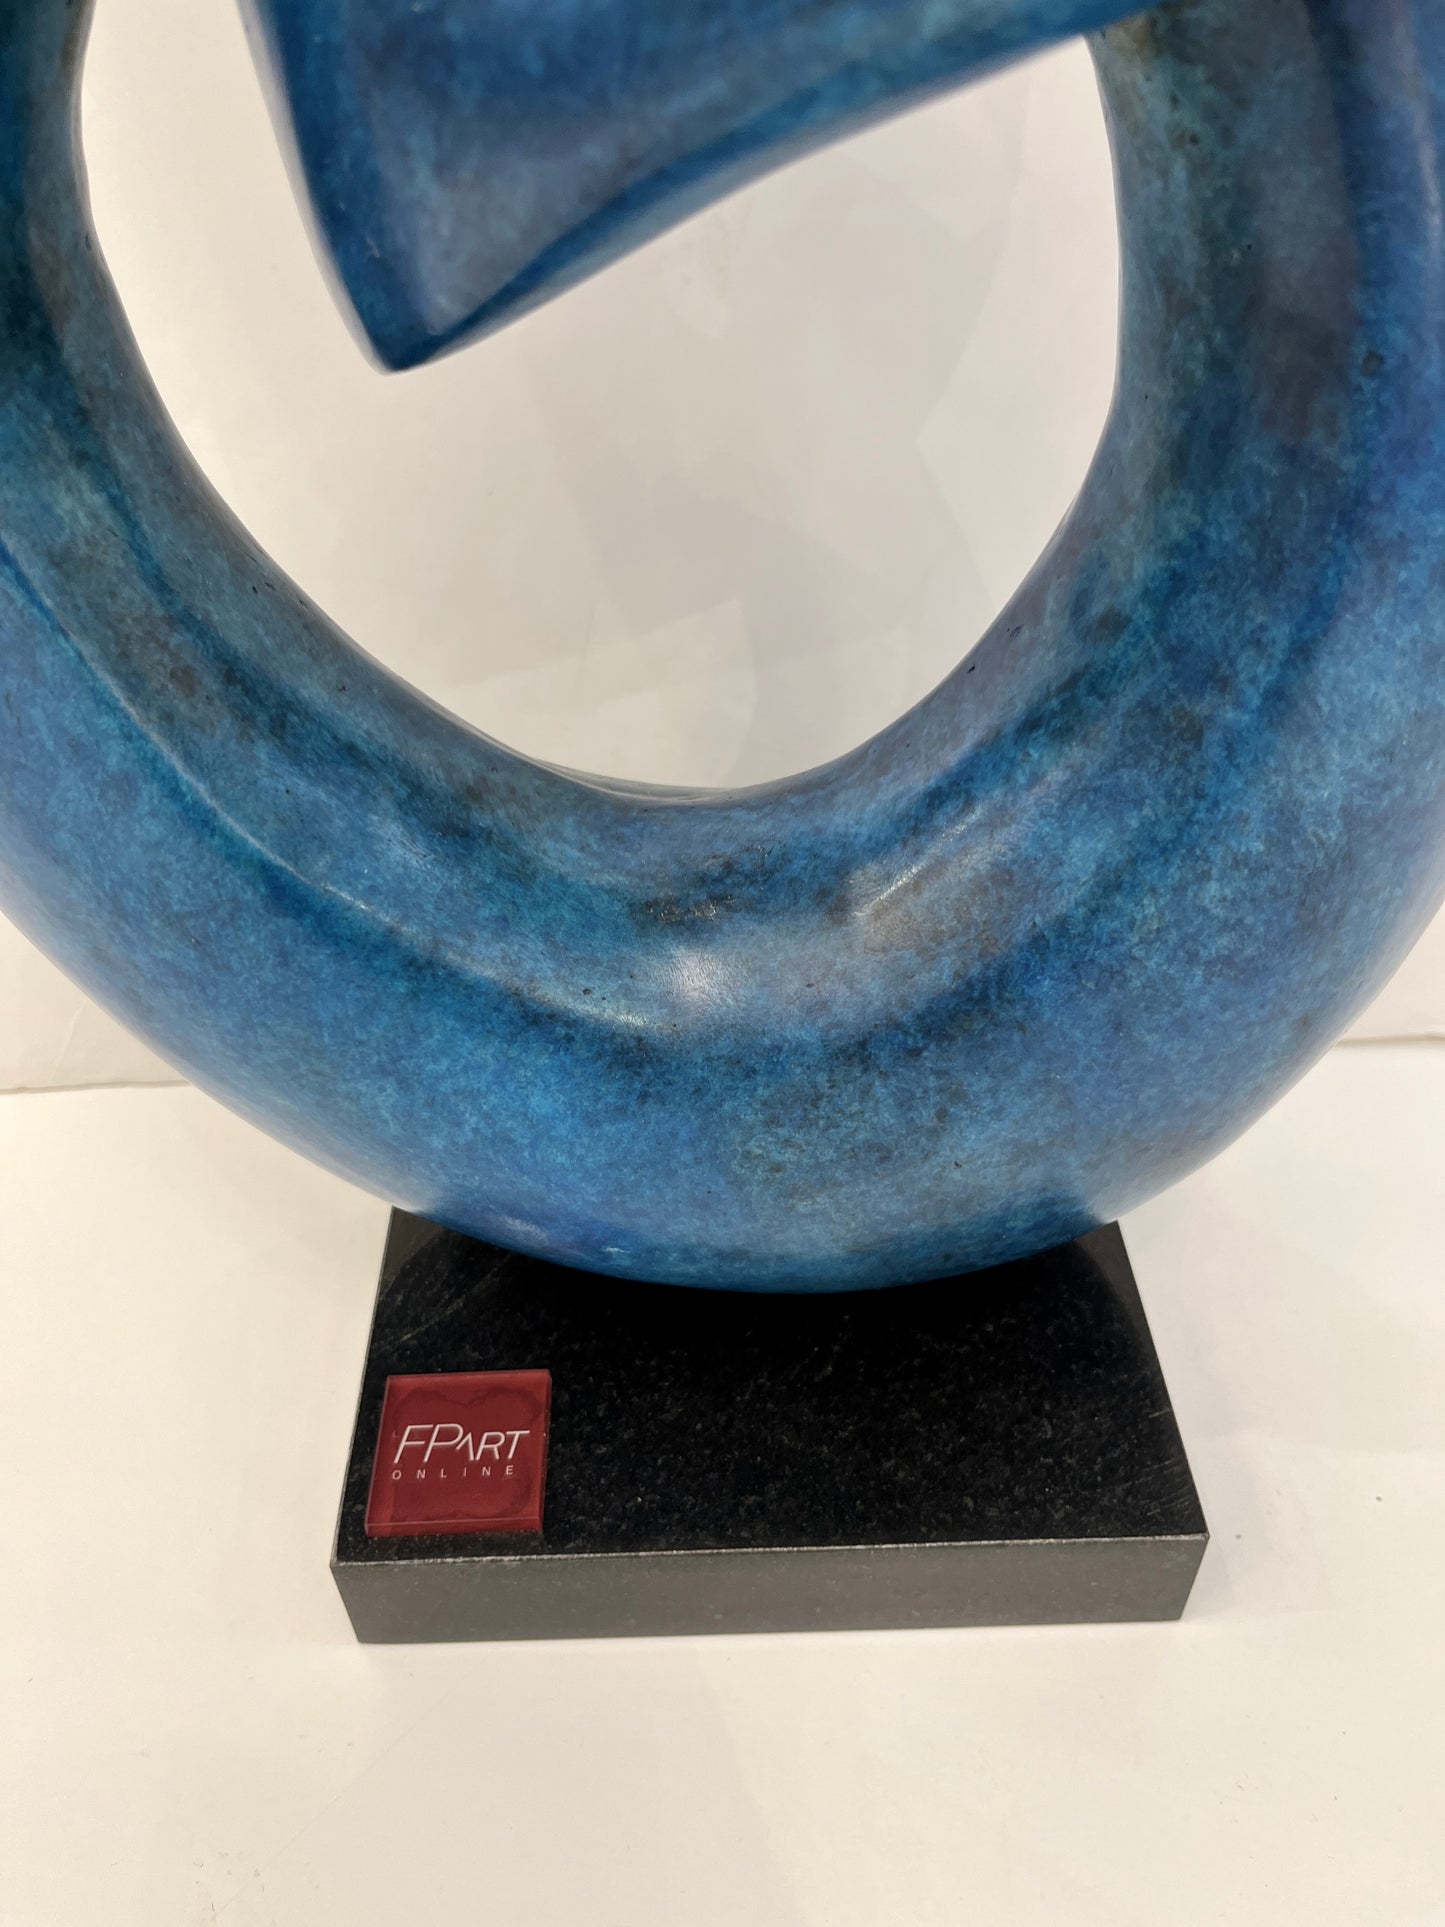 “Two Rings” Contemporary Italian Blue Patinated Bronze Abstract Sculpture